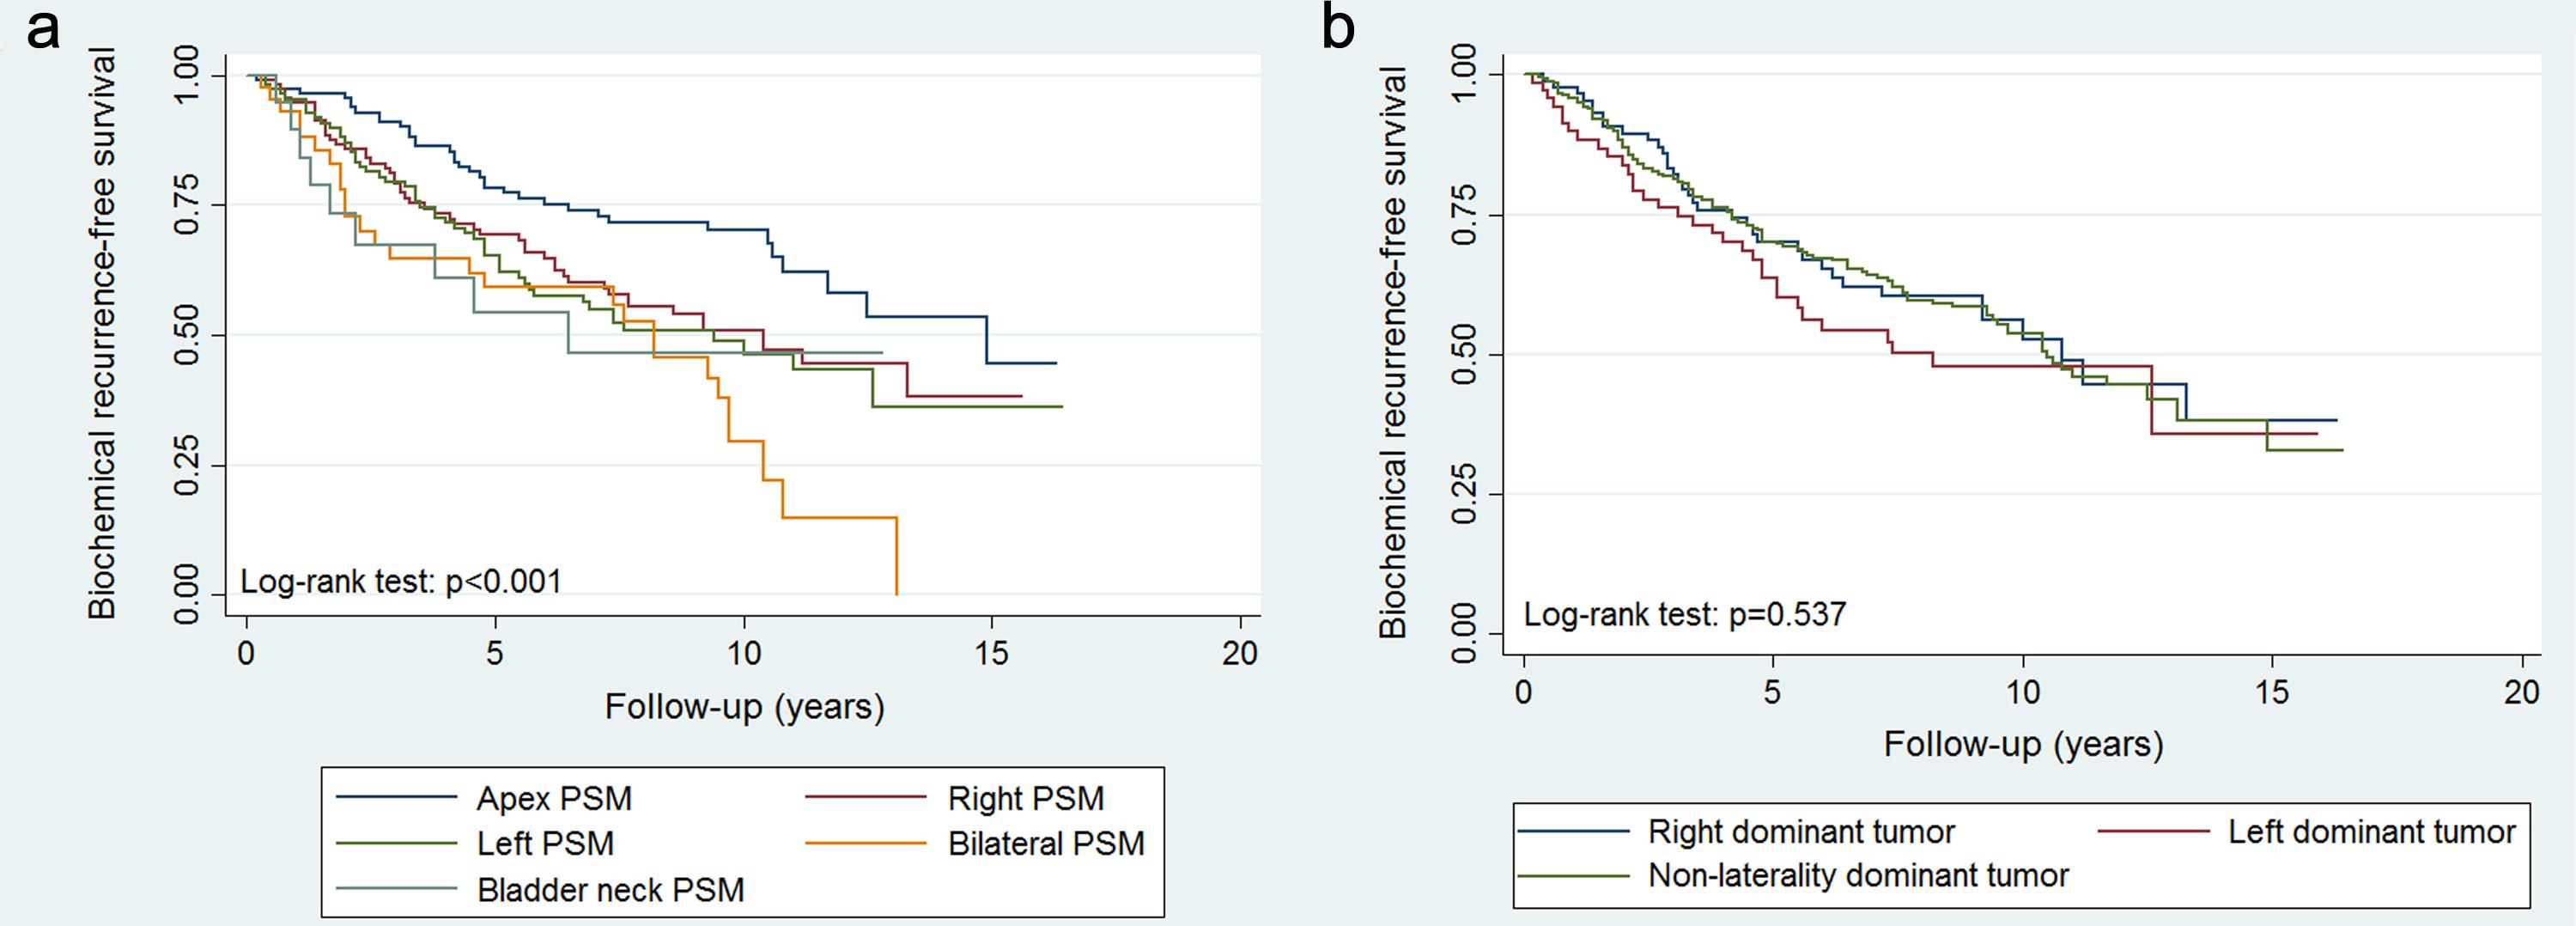 Kaplan-Meier curves showing biochemical recurrence-free survival in all 406 PSM cases stratified by apex PSM vs right PSM vs left PSM vs bilateral PSM vs bladder neck PSM (a) and right dominant tumor vs left dominant tumor vs non-laterality dominant tumor (b).